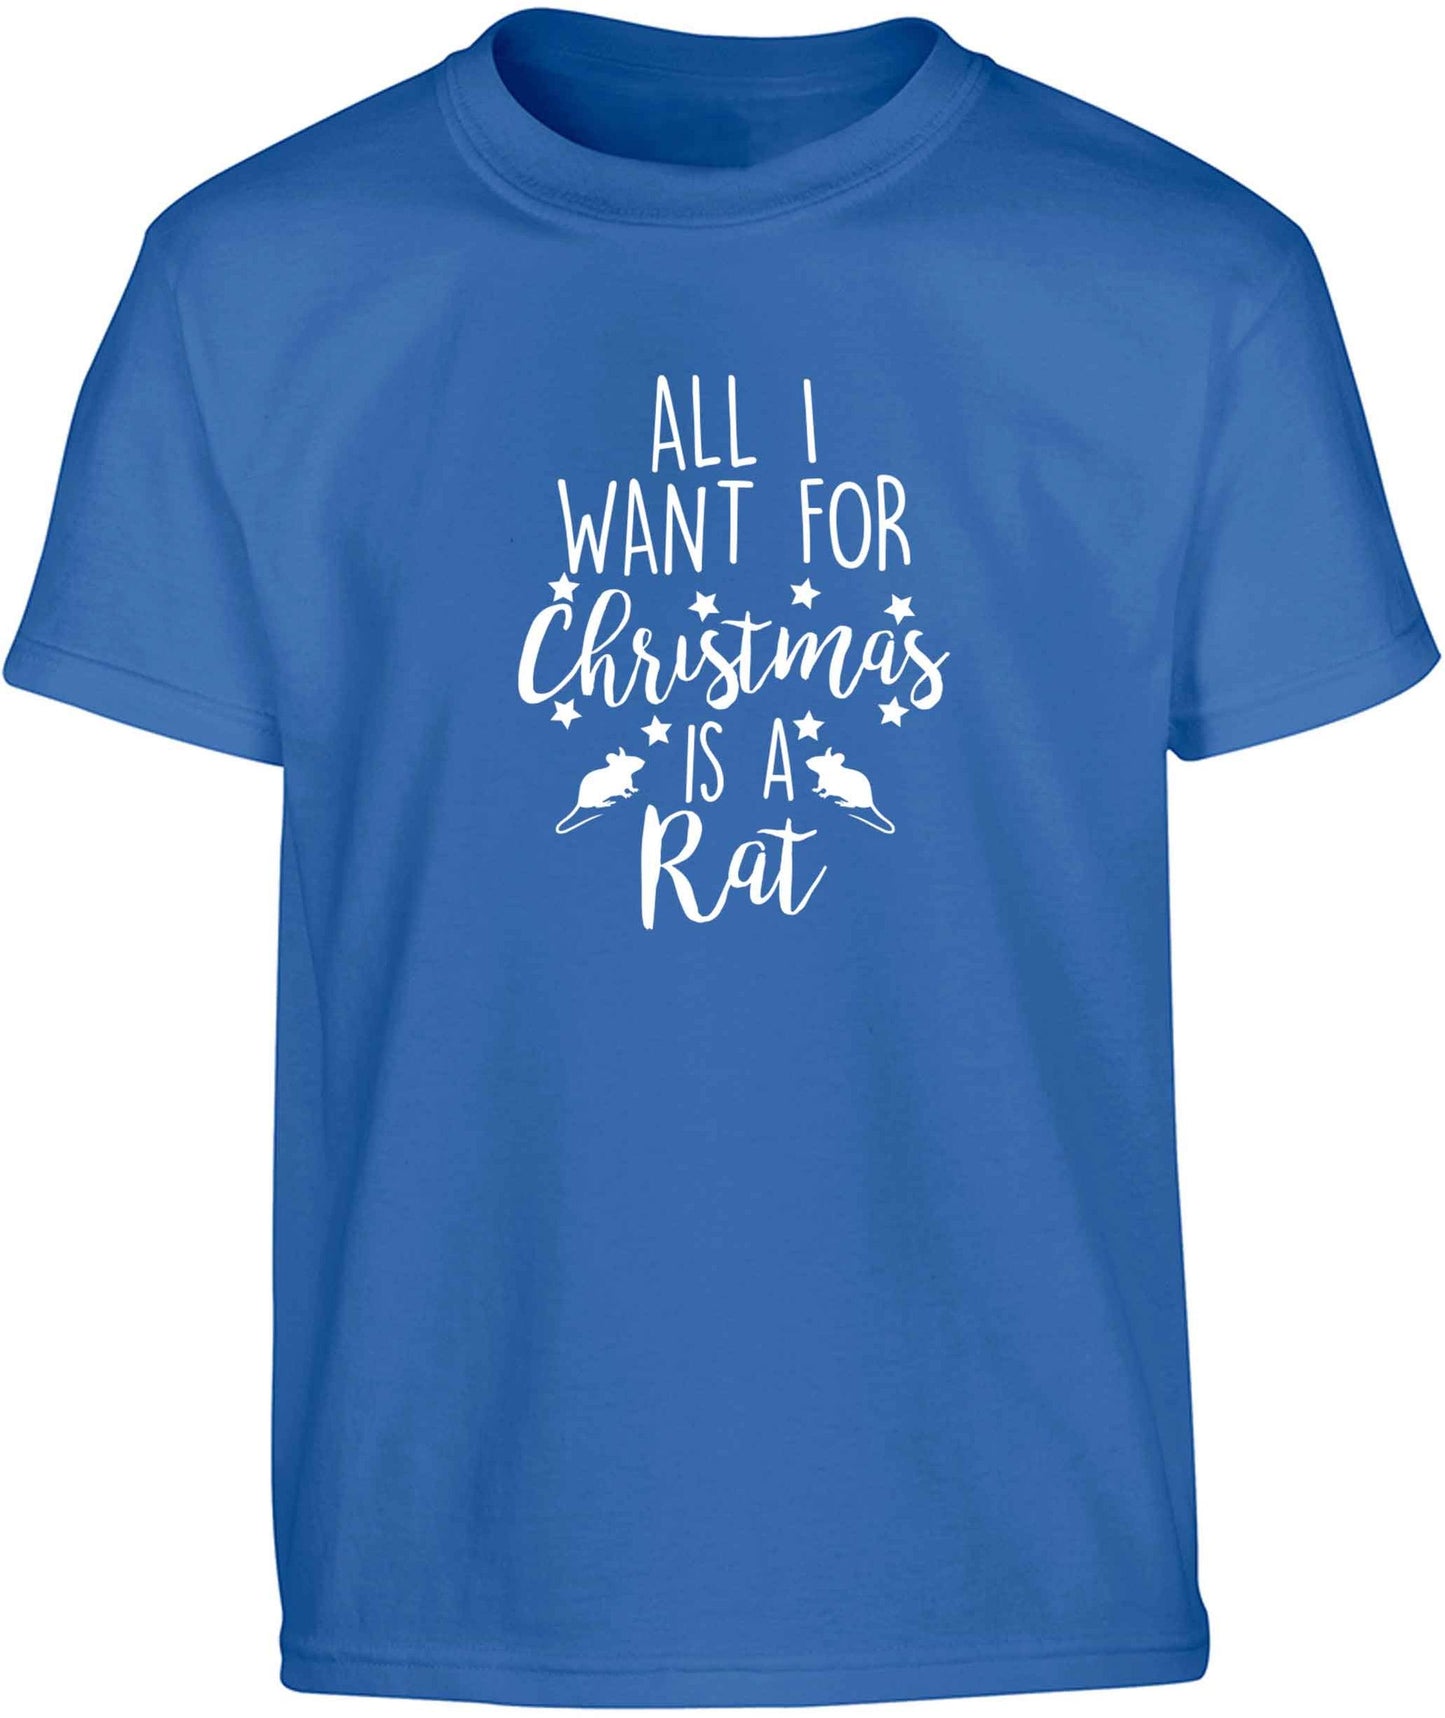 All I want for Christmas is a rat Children's blue Tshirt 12-13 Years